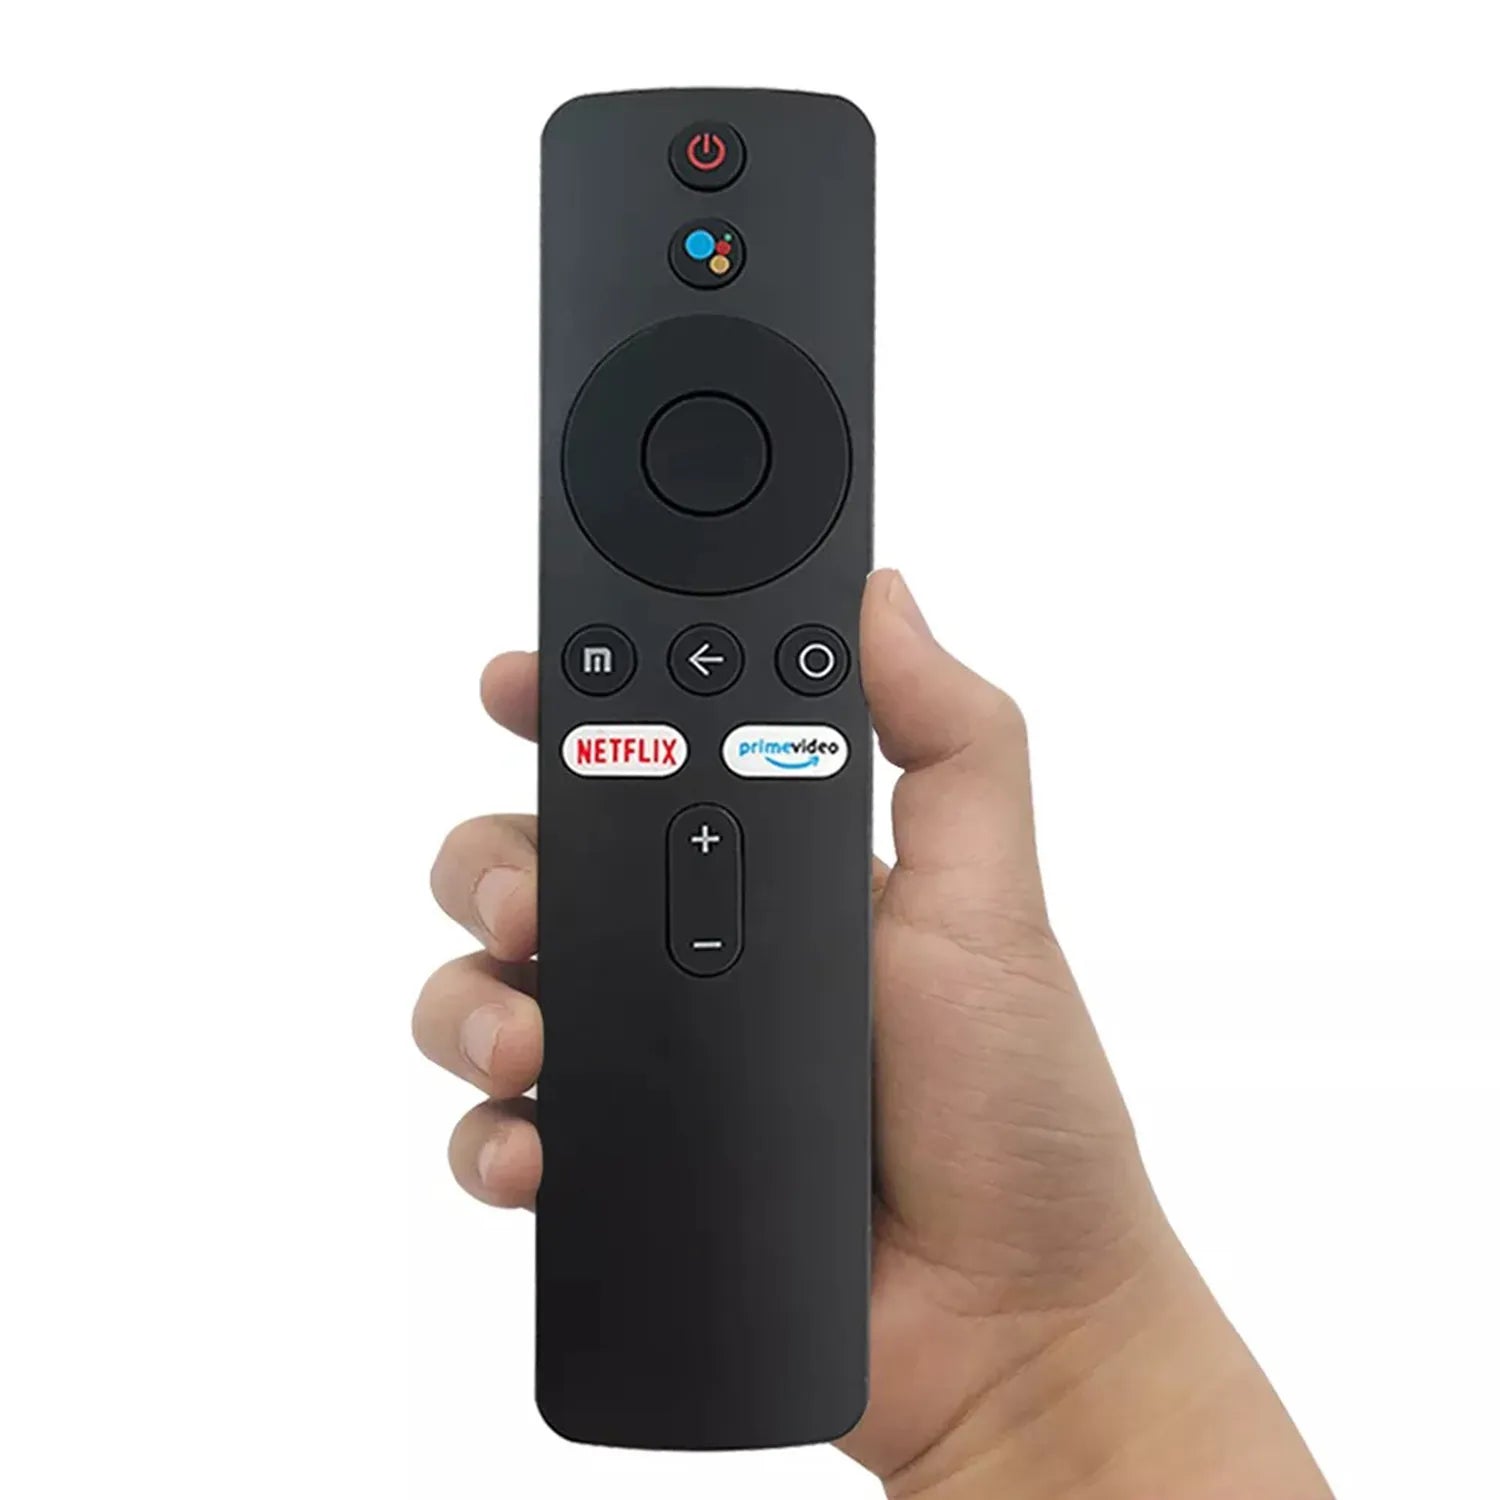 Muvit Smart TV Remote Control with Voice Control for MI TV